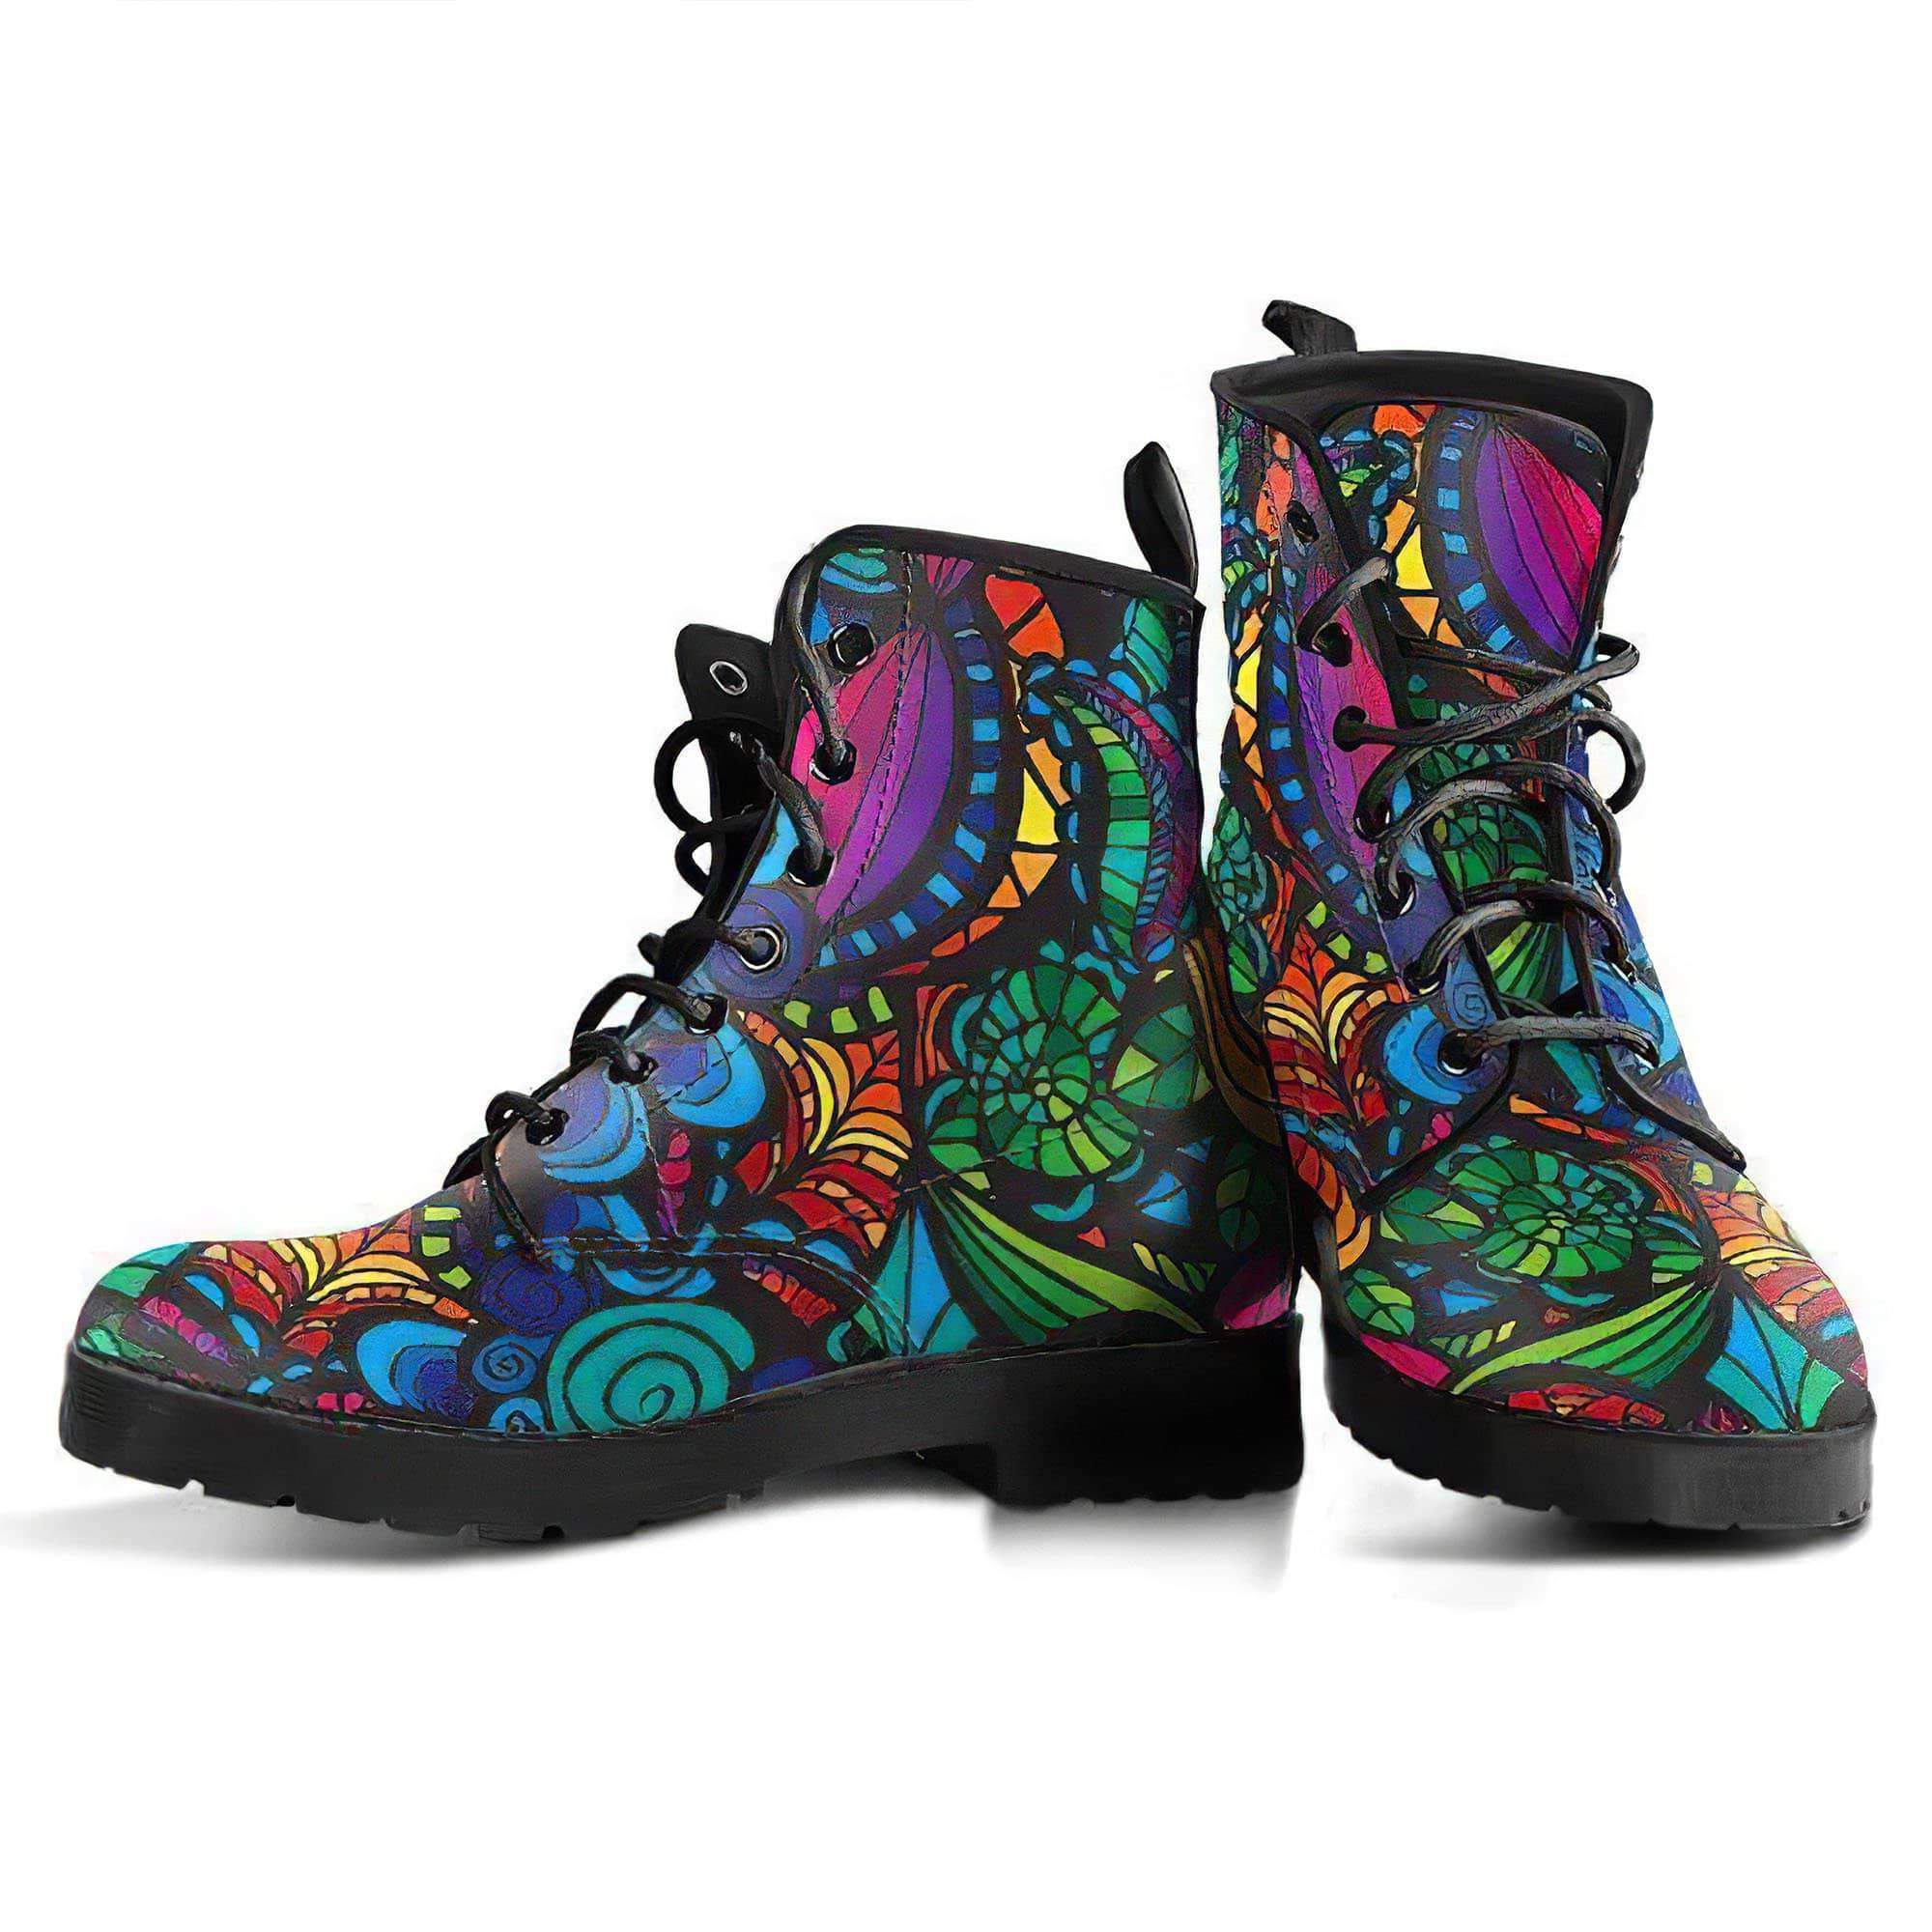 mosaic-flower-handcrafted-boots-women-s-leather-boots-12051912556605.jpg